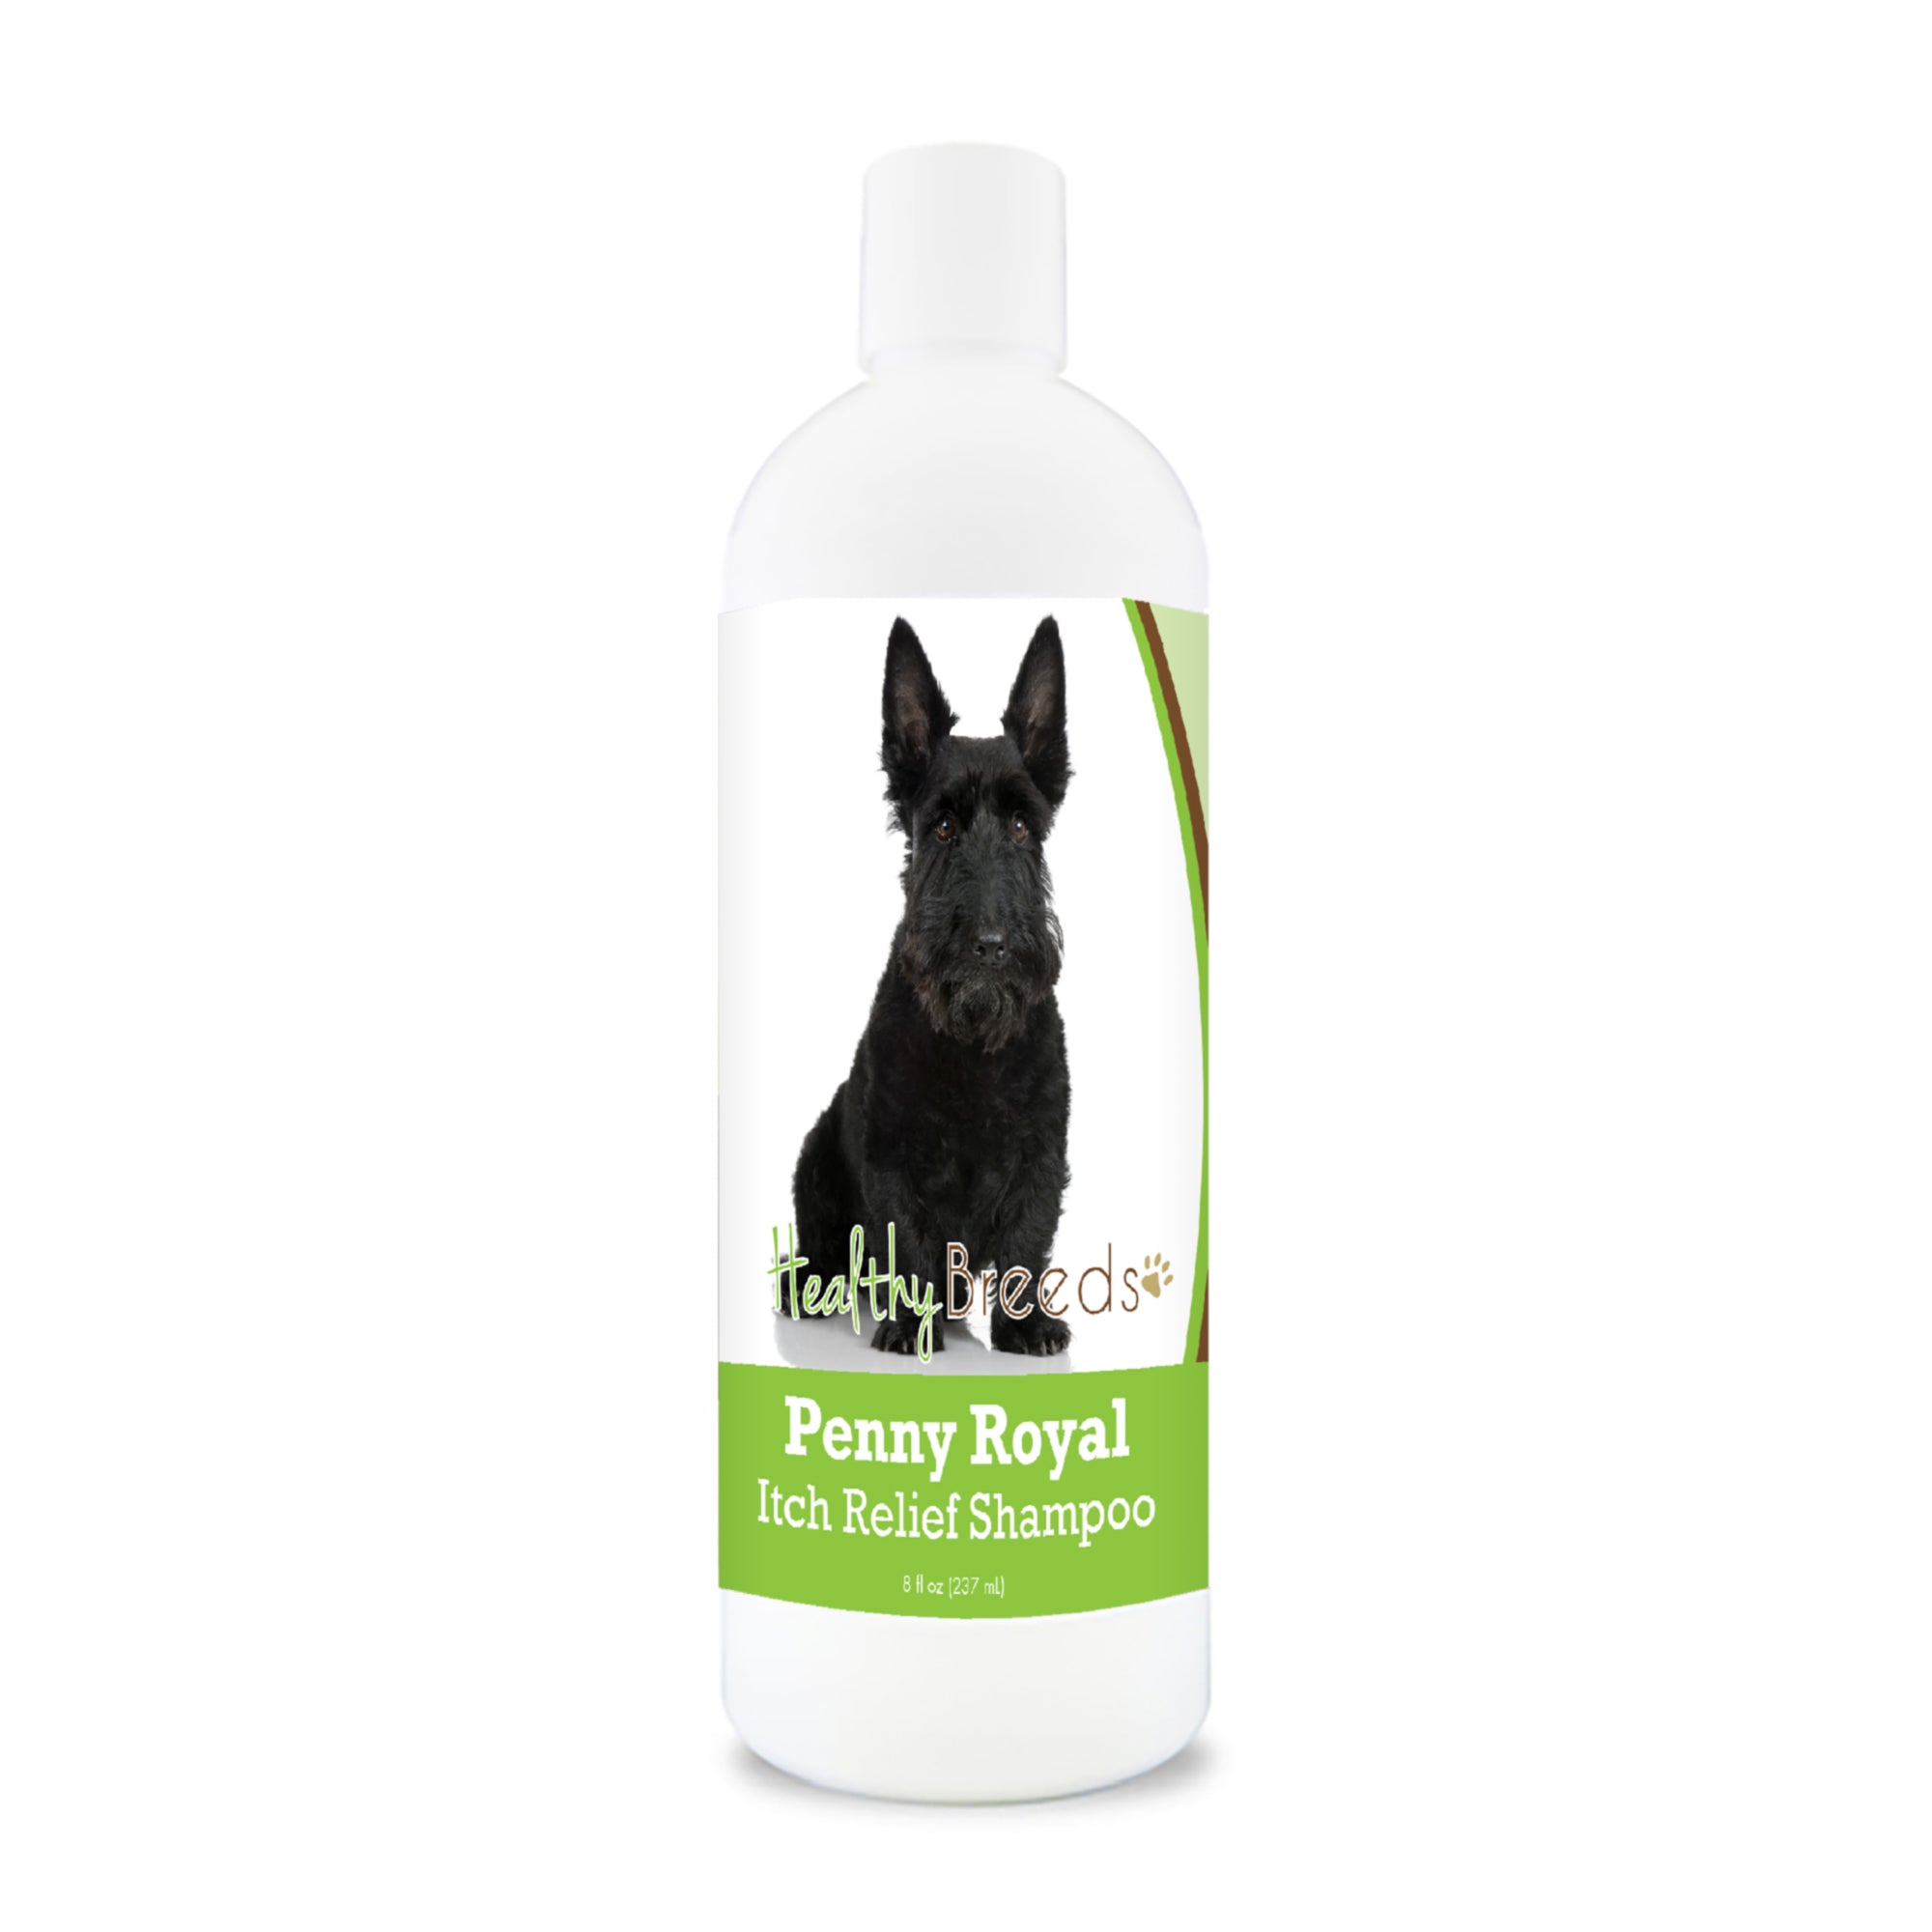 Scottish Terrier Penny Royal Itch Relief Shampoo 8 oz